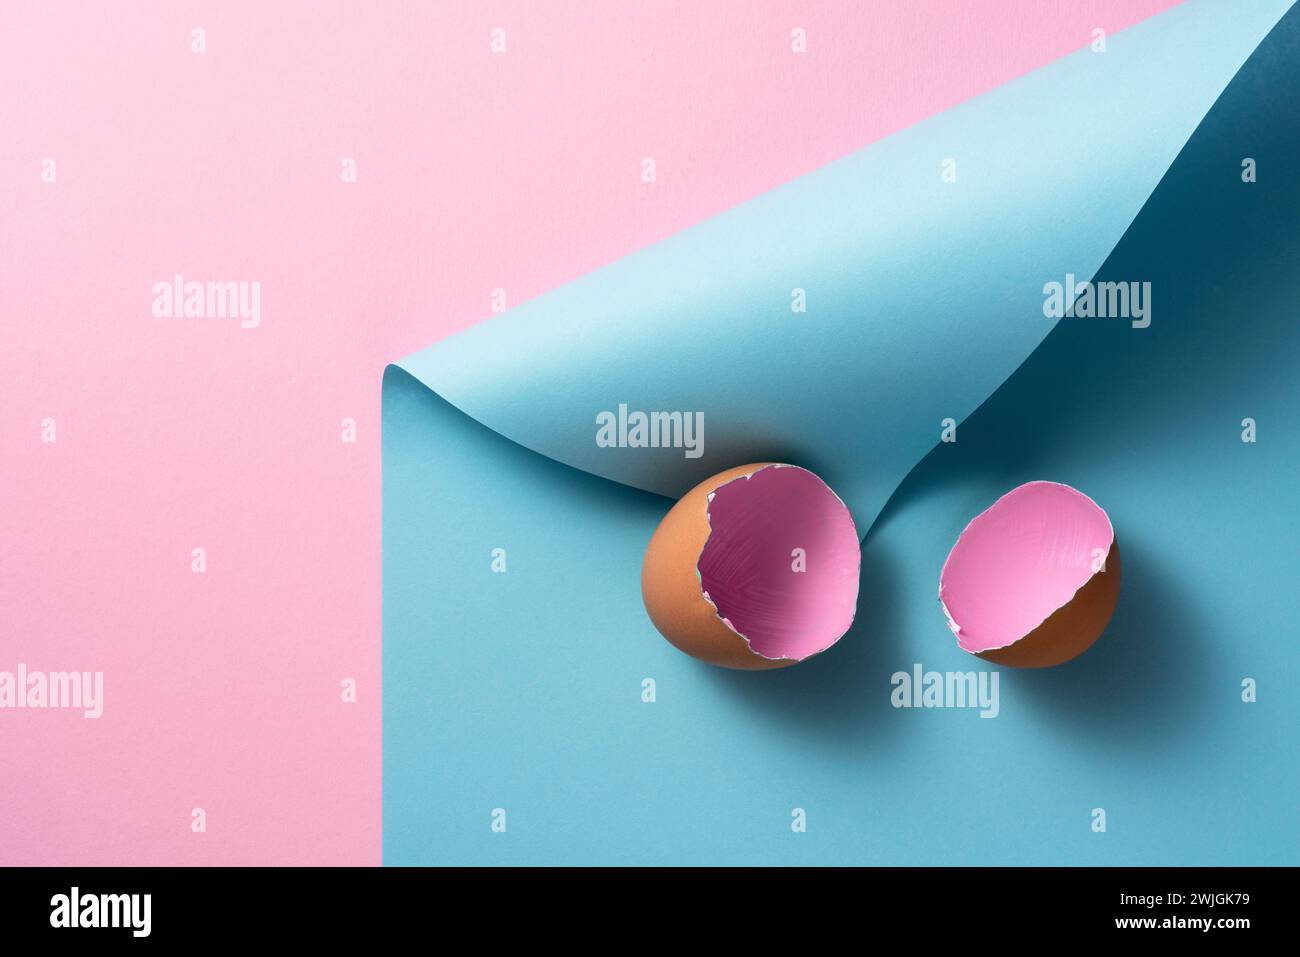 Pink painted easter egg shells on pink and blue curled paper background Stock Photo